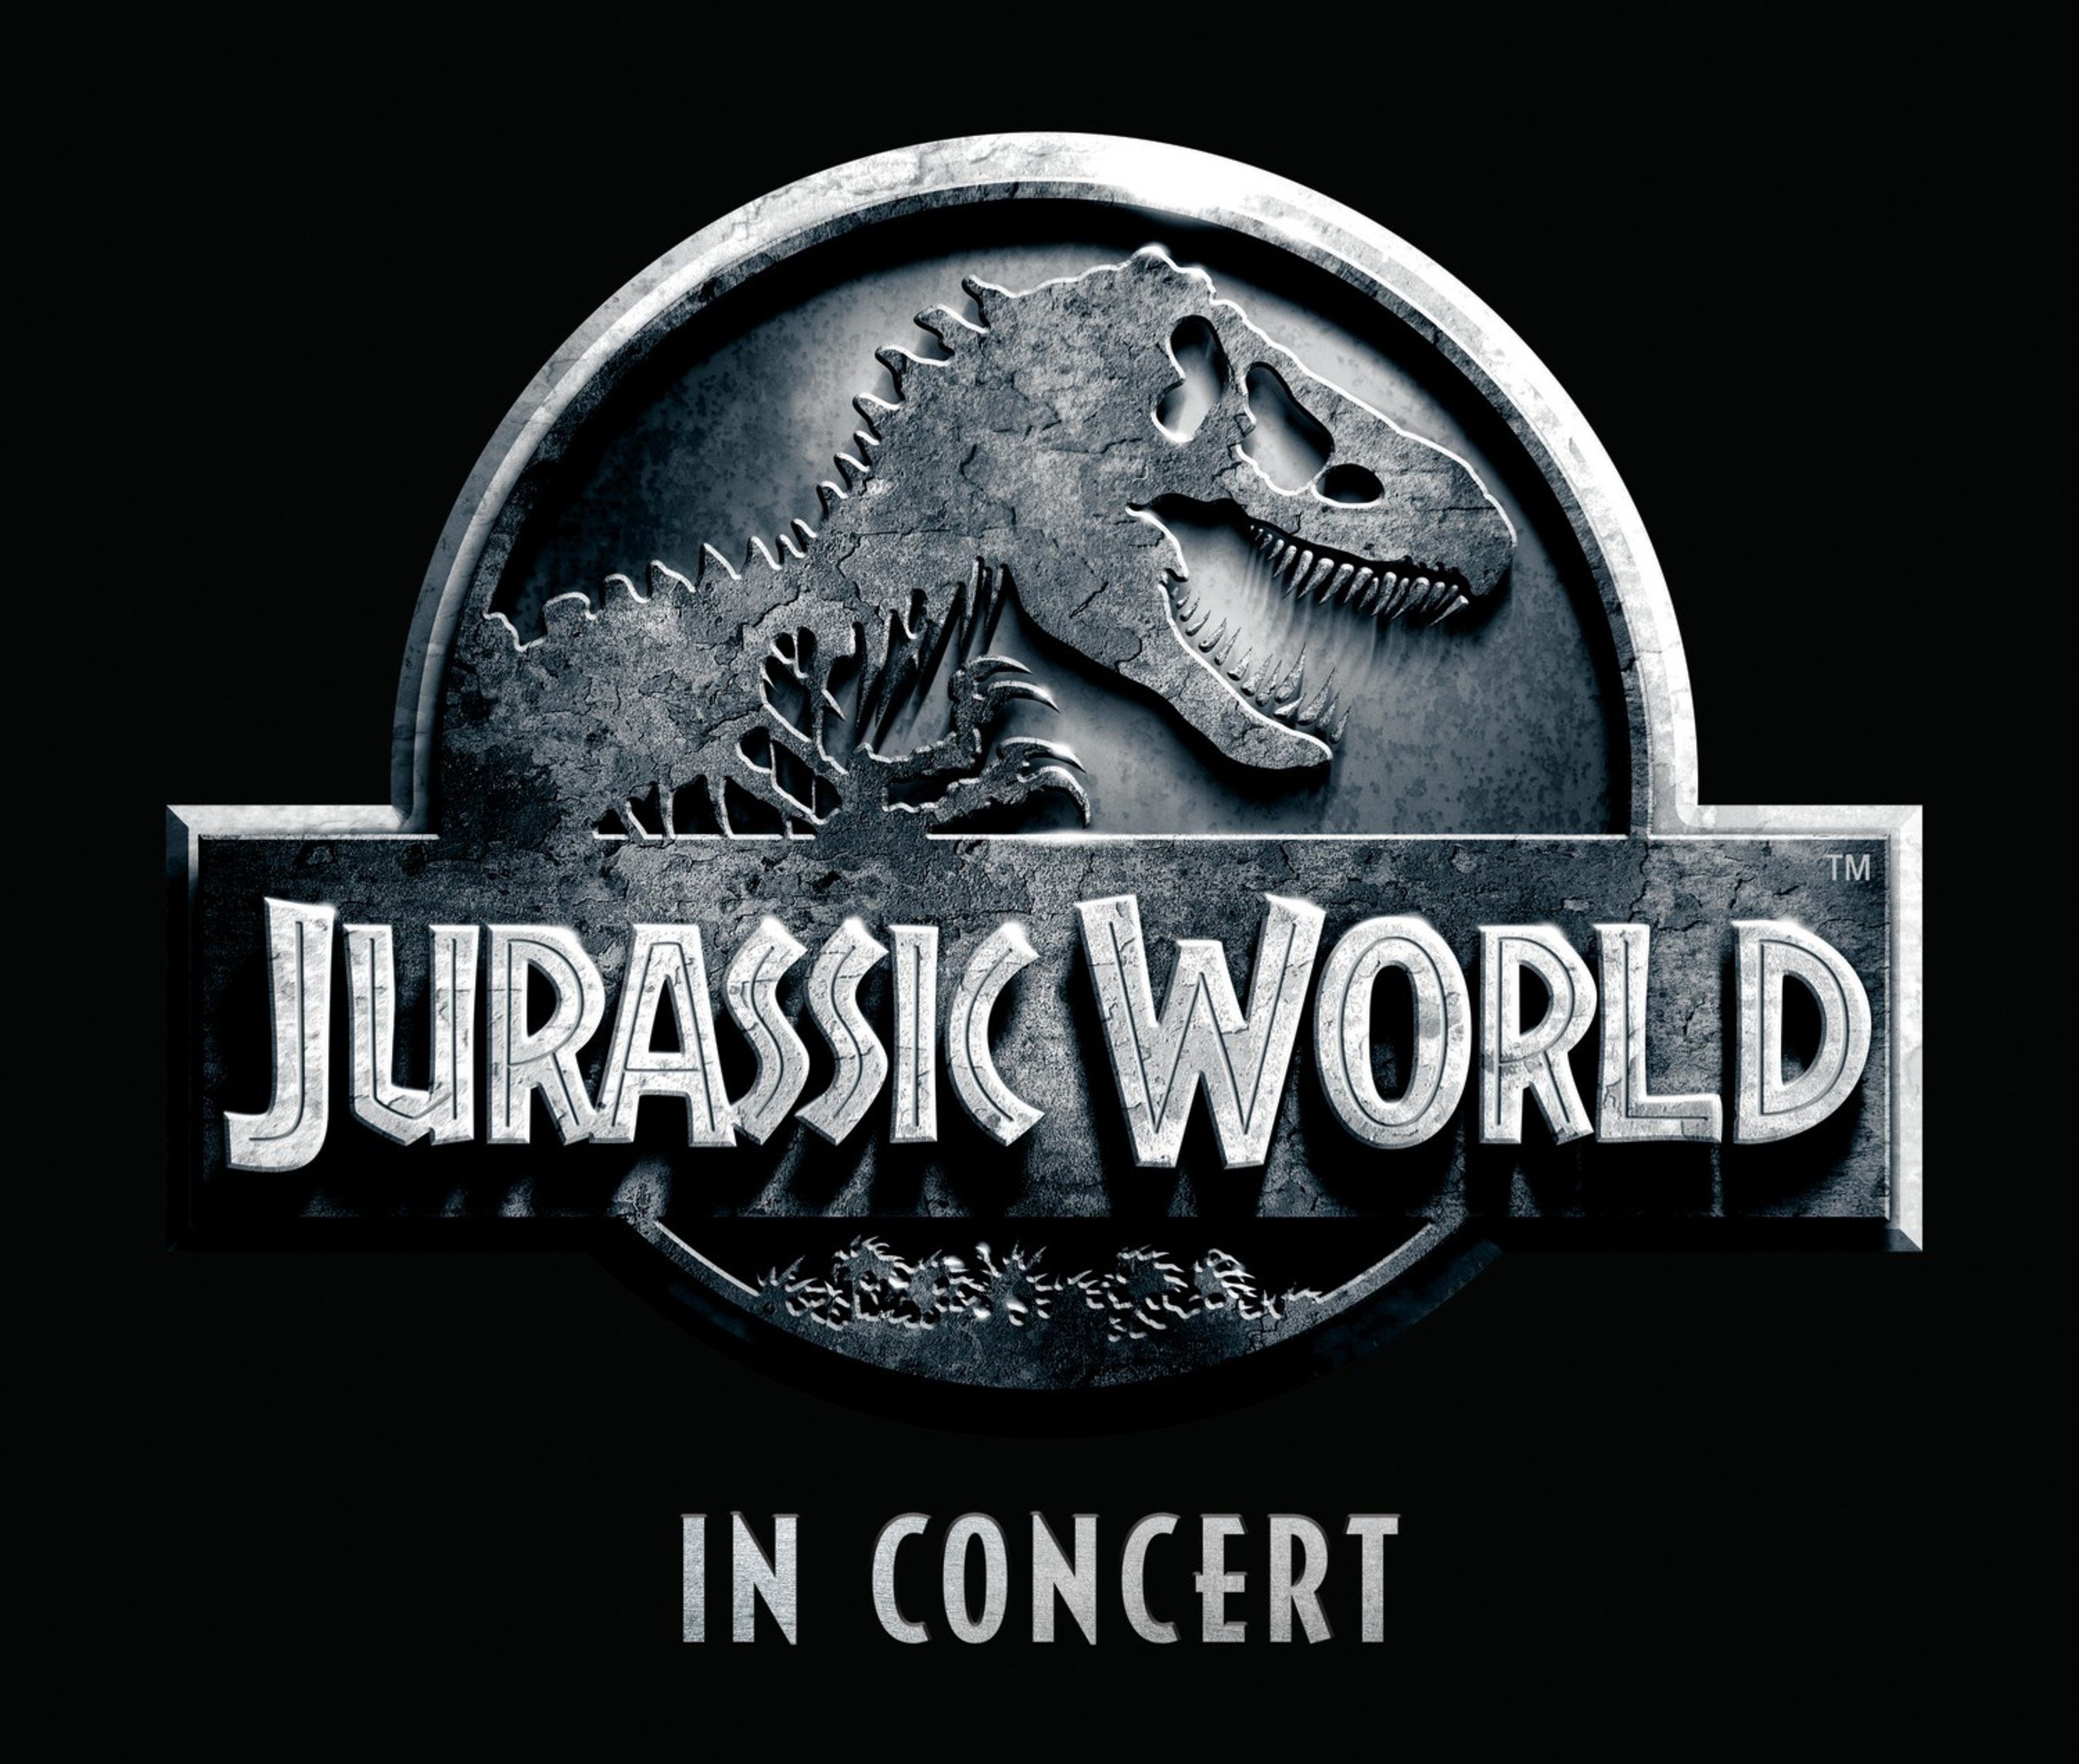 National Symphony Orchestra Performs Jurassic World in Concert 